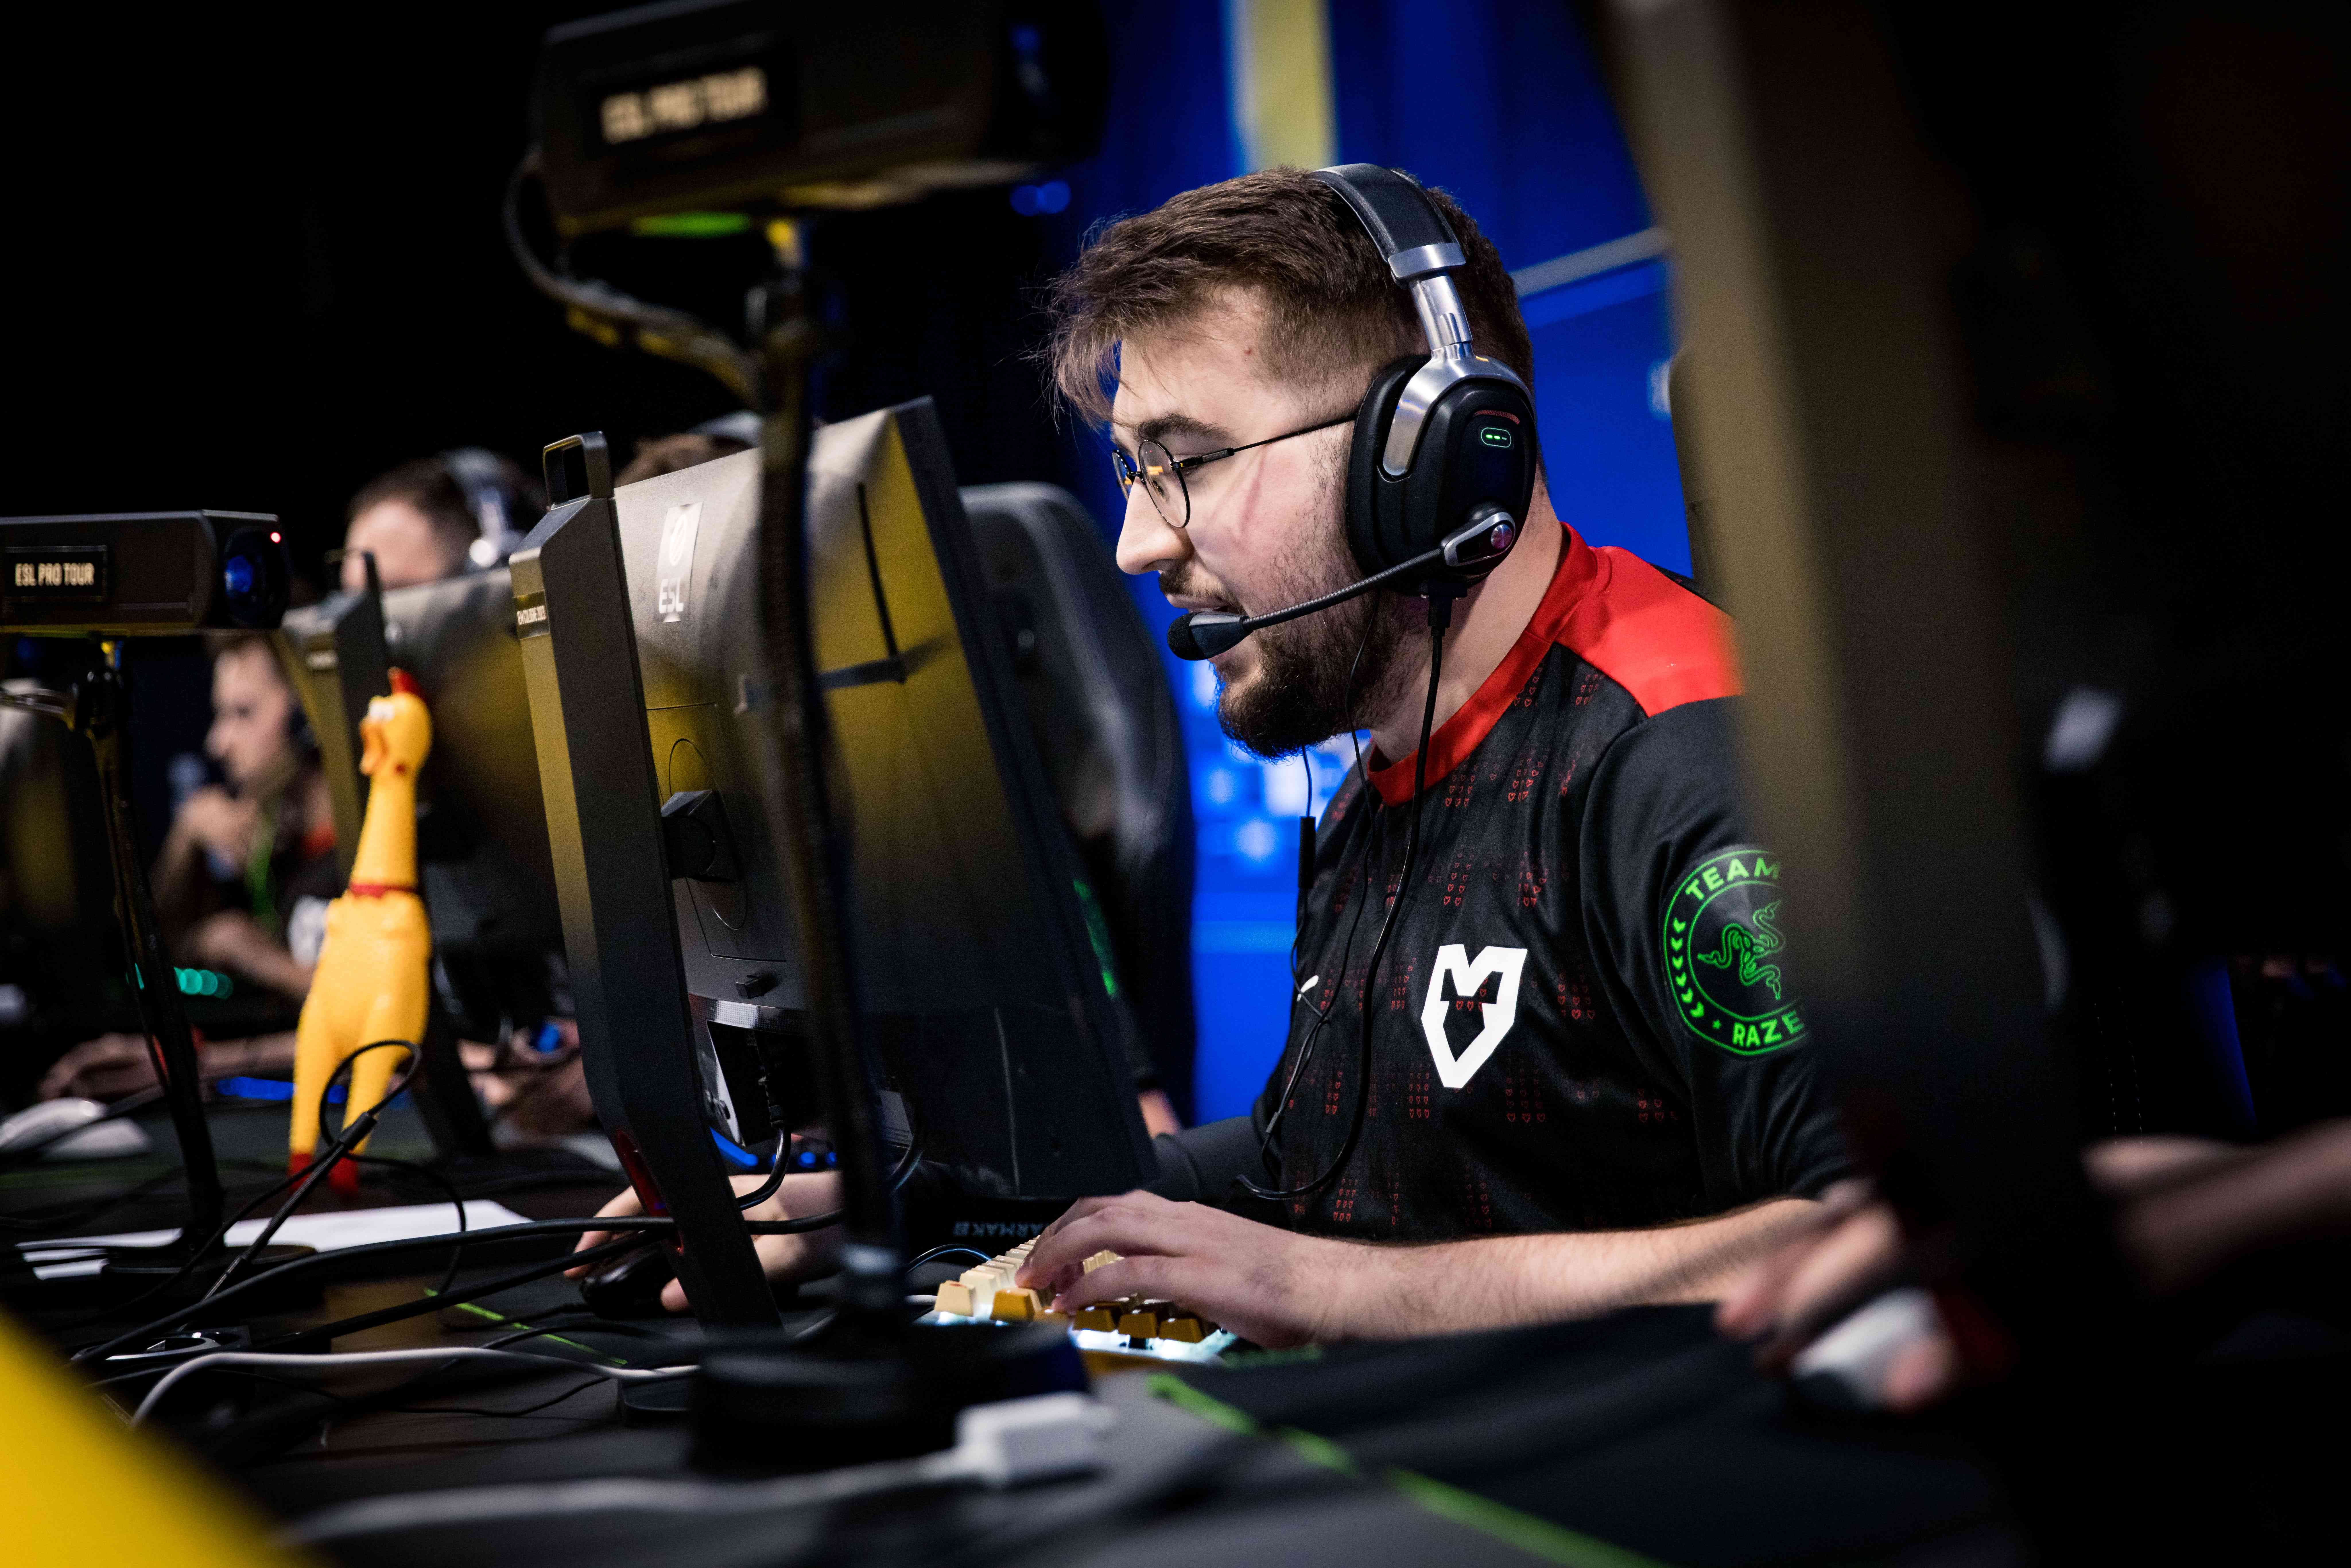 torzsi recovered from a bad start under siuhy’s leadership at IEM Cologne to secure an unlikely MVP medal in Malta (Image Credits: ESL | Helena Kristiansson)